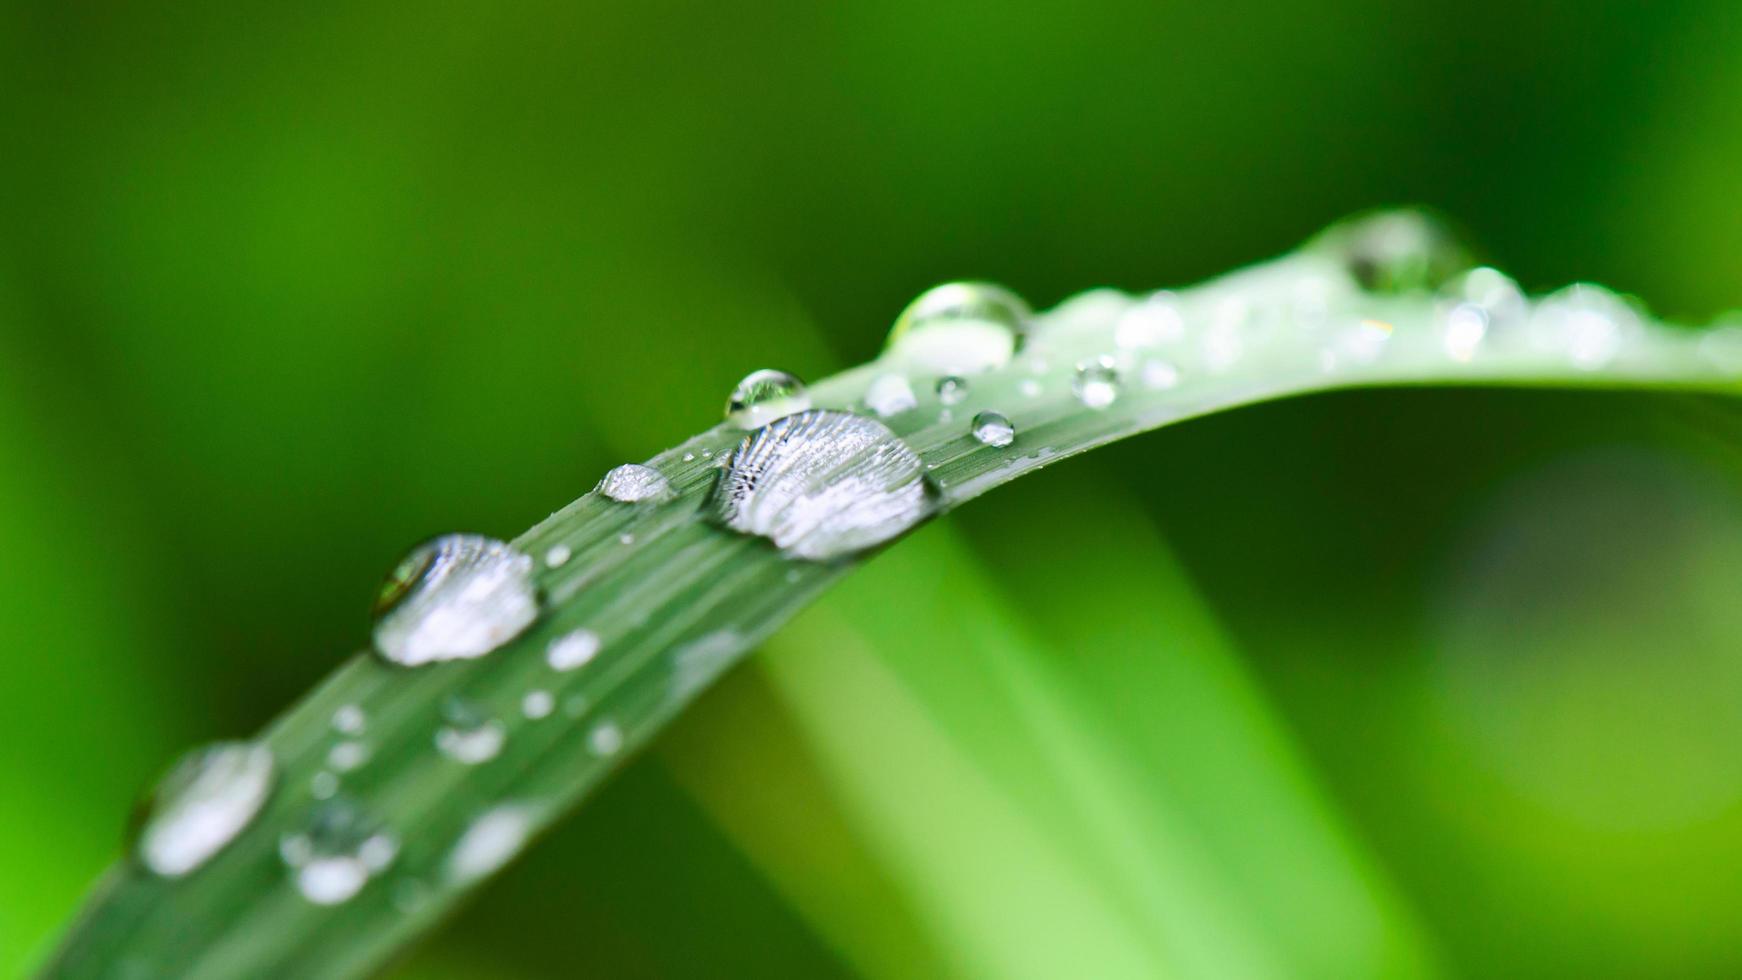 Water droplets on grass photo